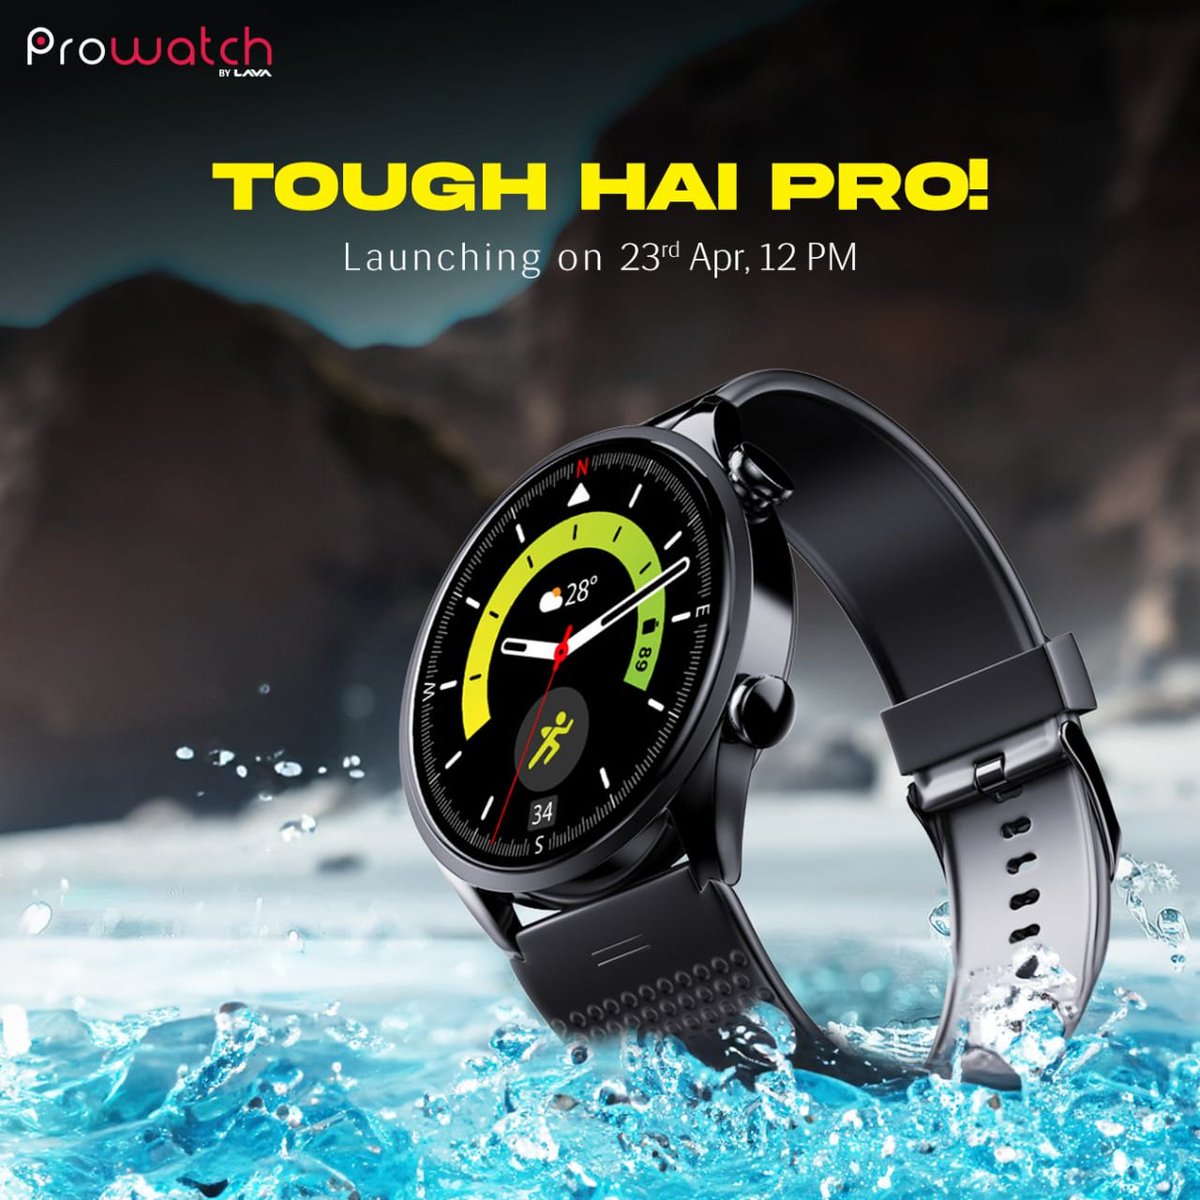 Hey tweeps have you heard it that all new Pro watch launching with Gorilla Glass 3 protection and a focus on privacy on  April 23rd . #ProwatchLaunchTomorrow